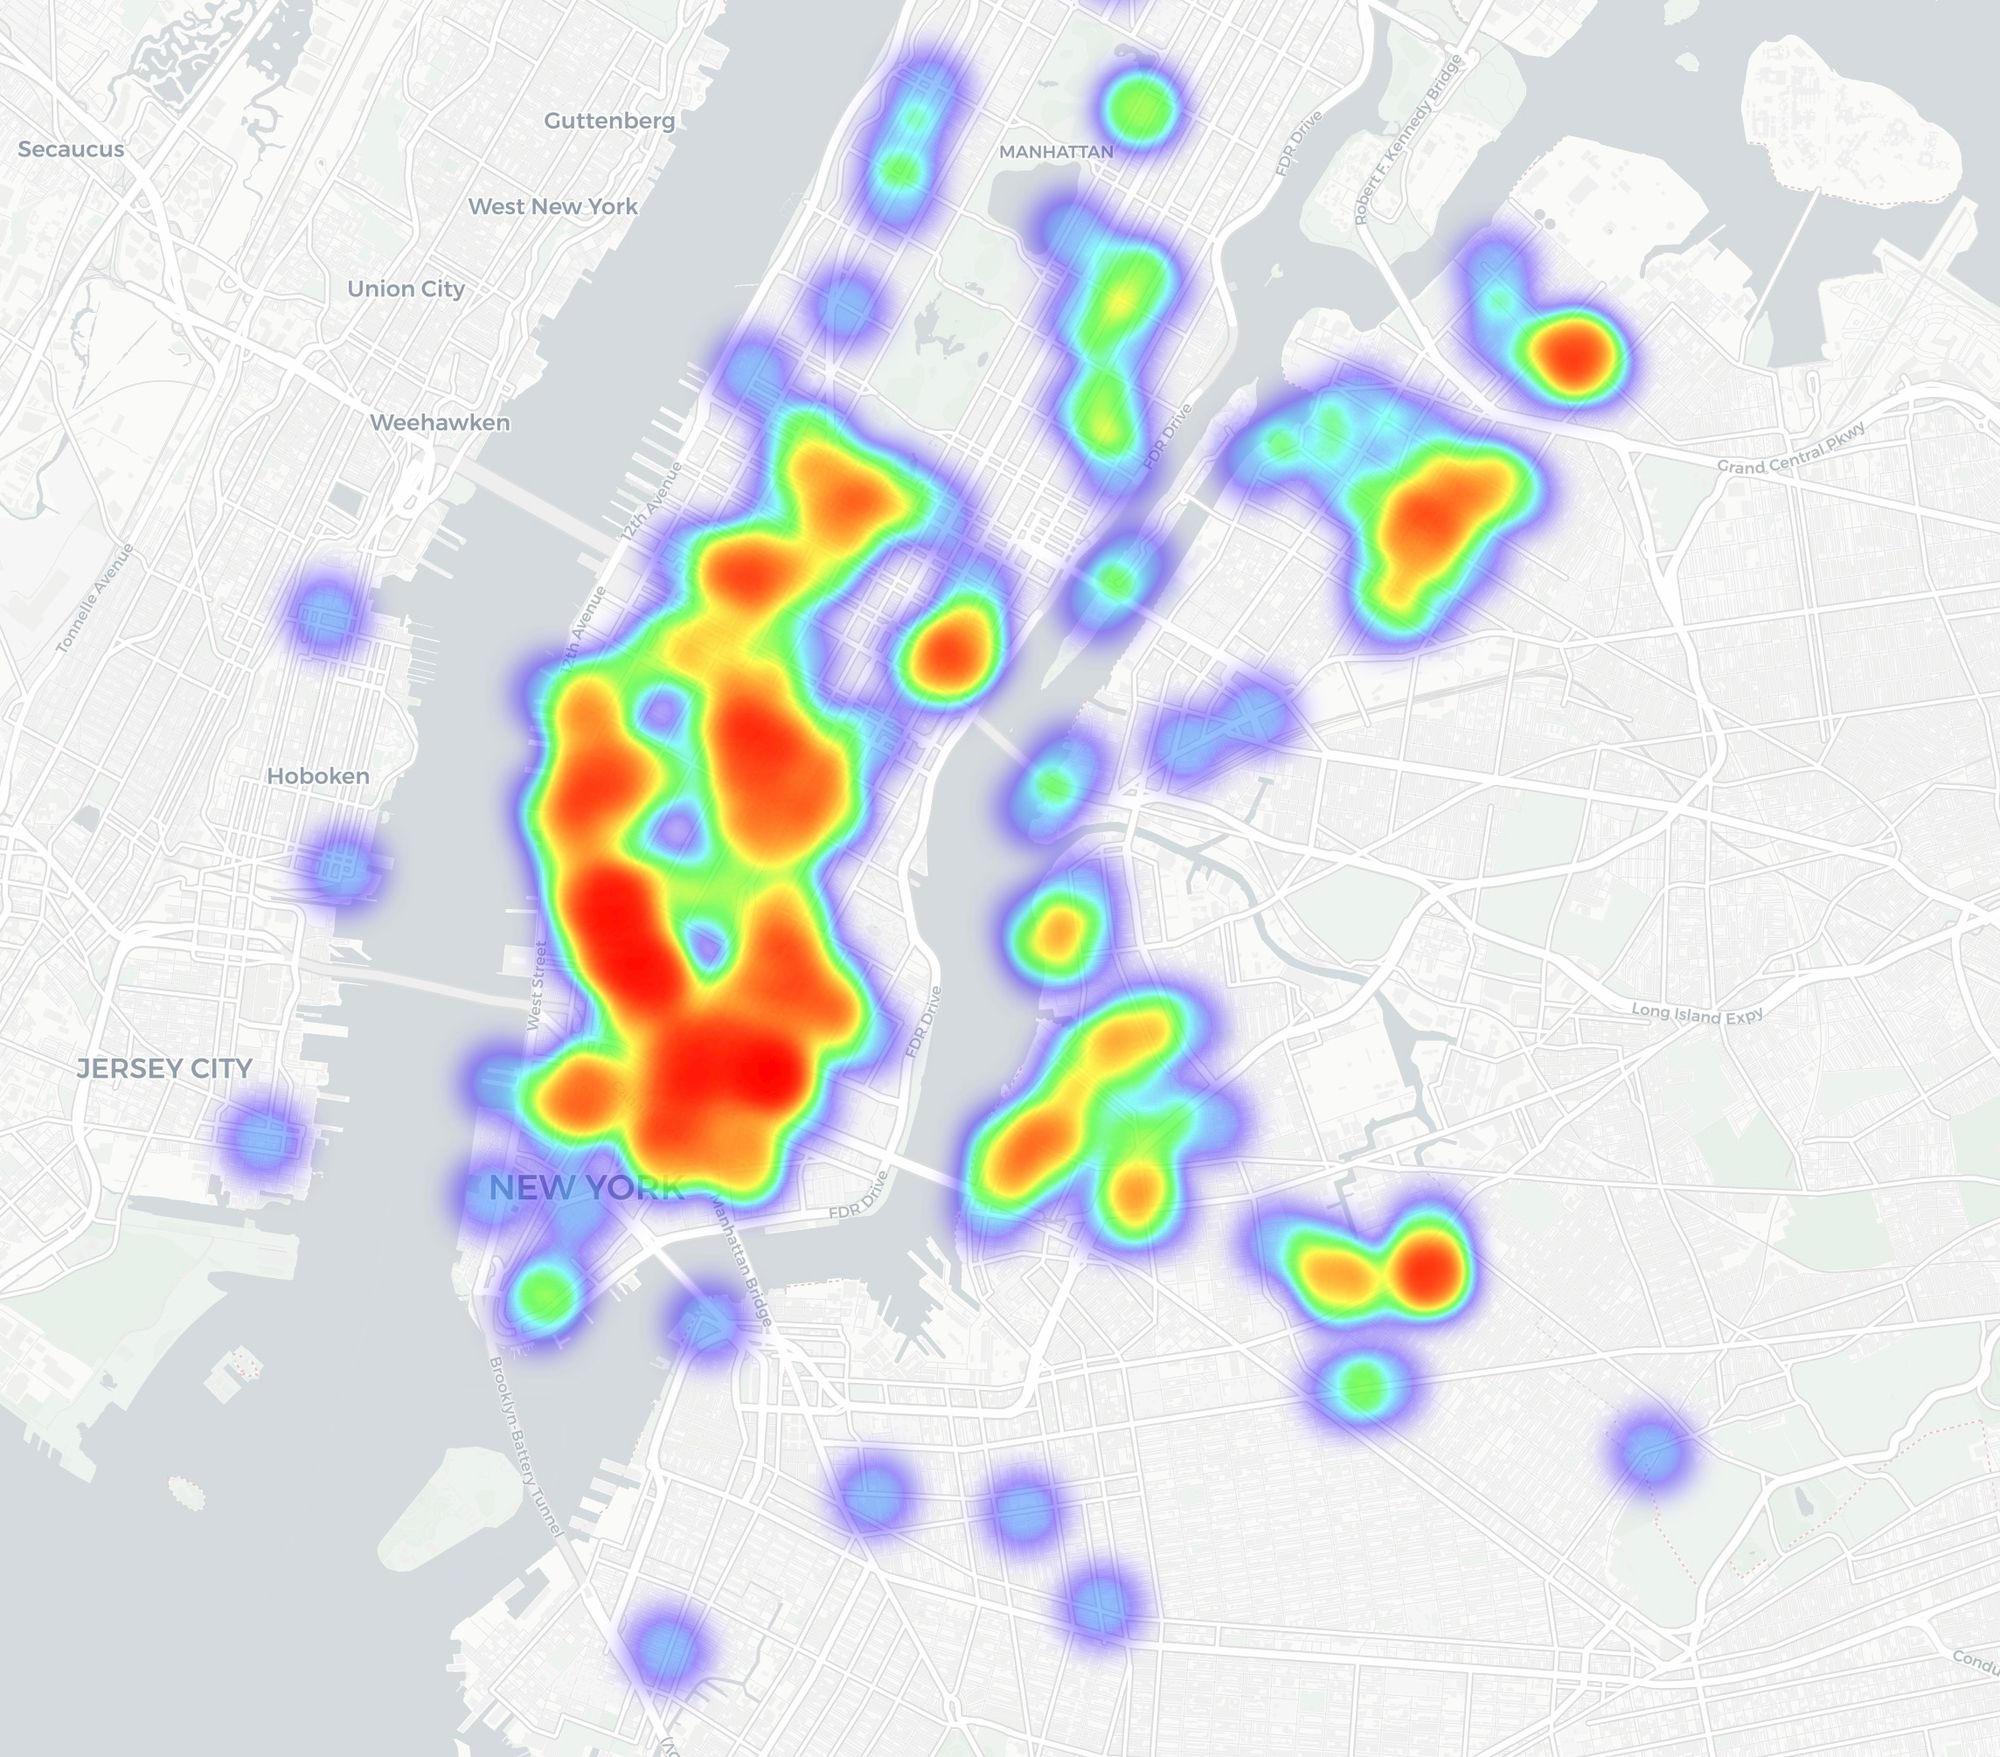 Heatmap showing all the places.